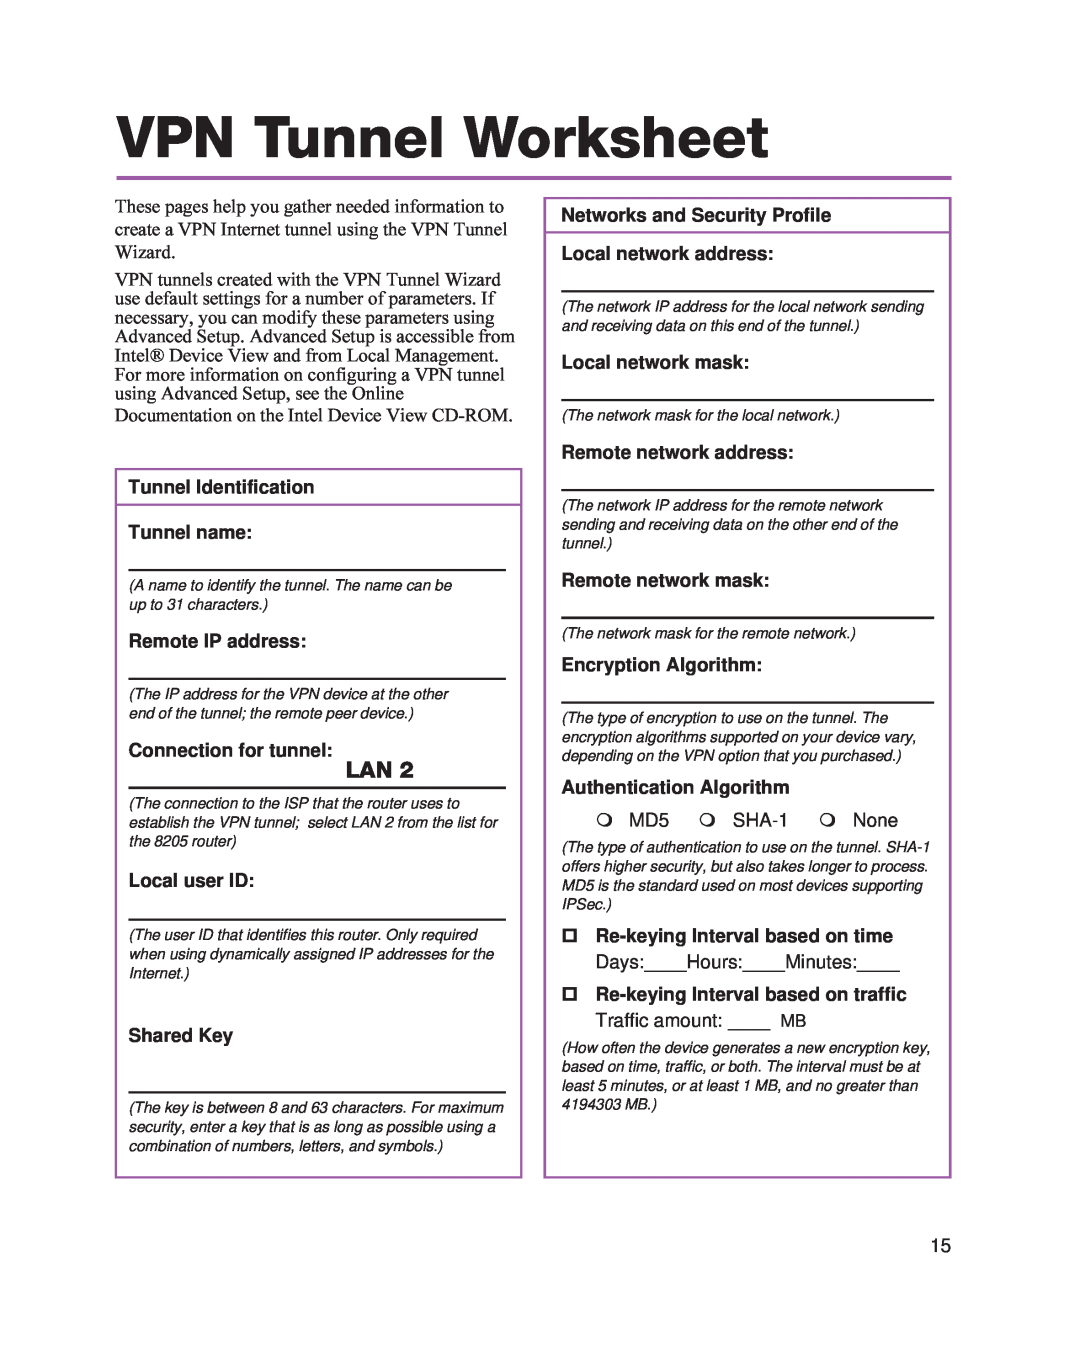 Intel 8205 VPN Tunnel Worksheet, Tunnel Identification Tunnel name, Remote IP address, Connection for tunnel, Shared Key 